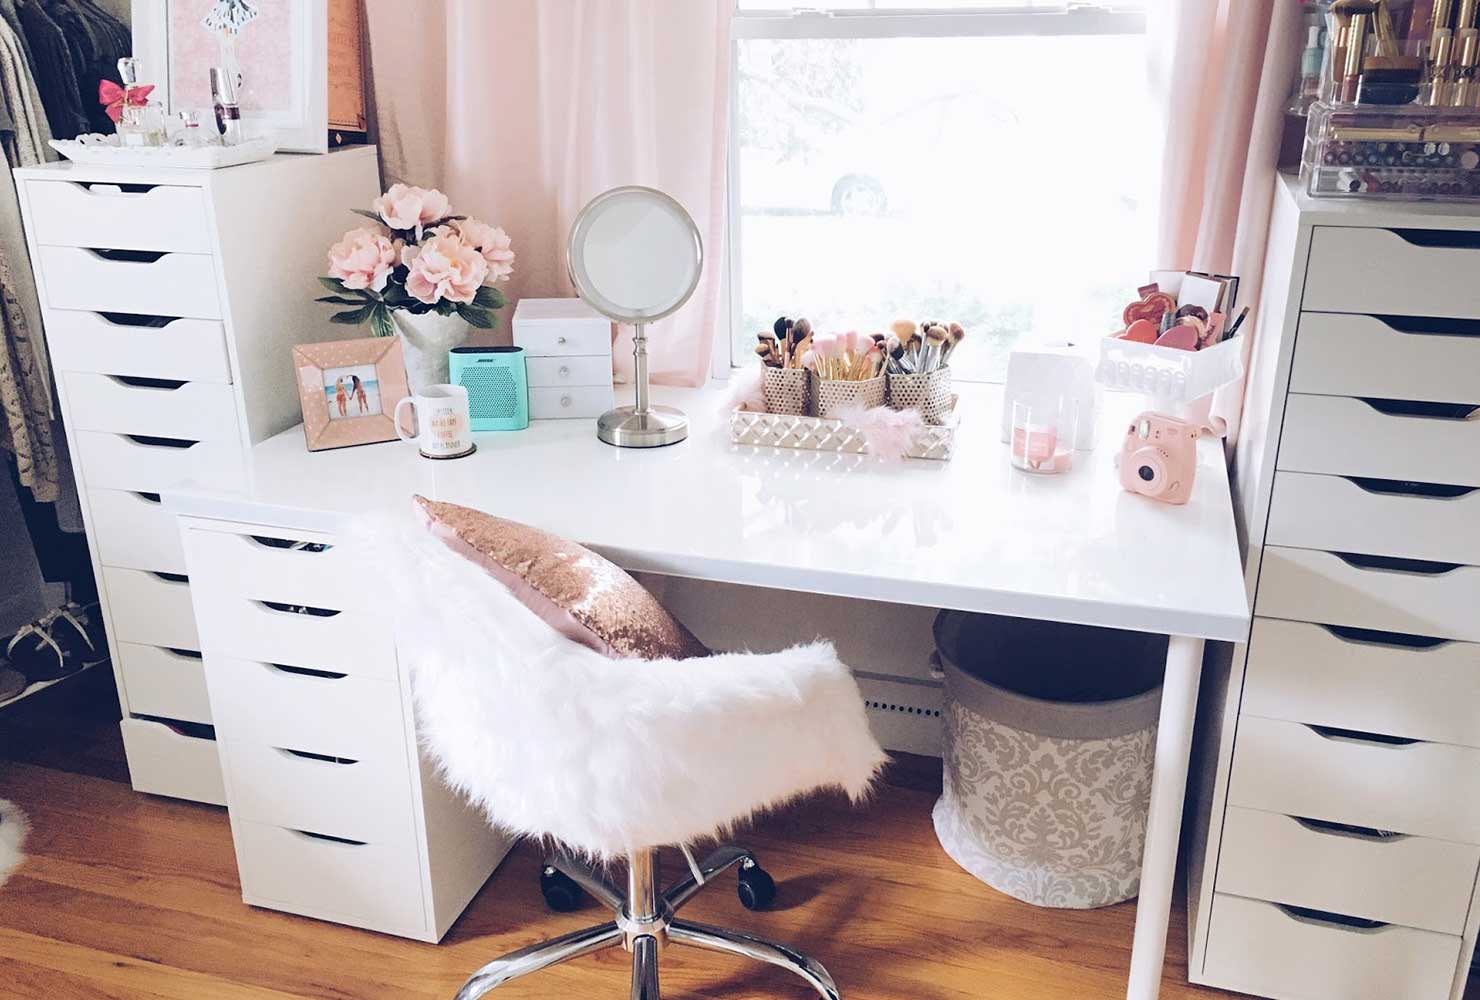 35 Makeup Room Ideas To Brighten Your Morning Routine | Shutterfly